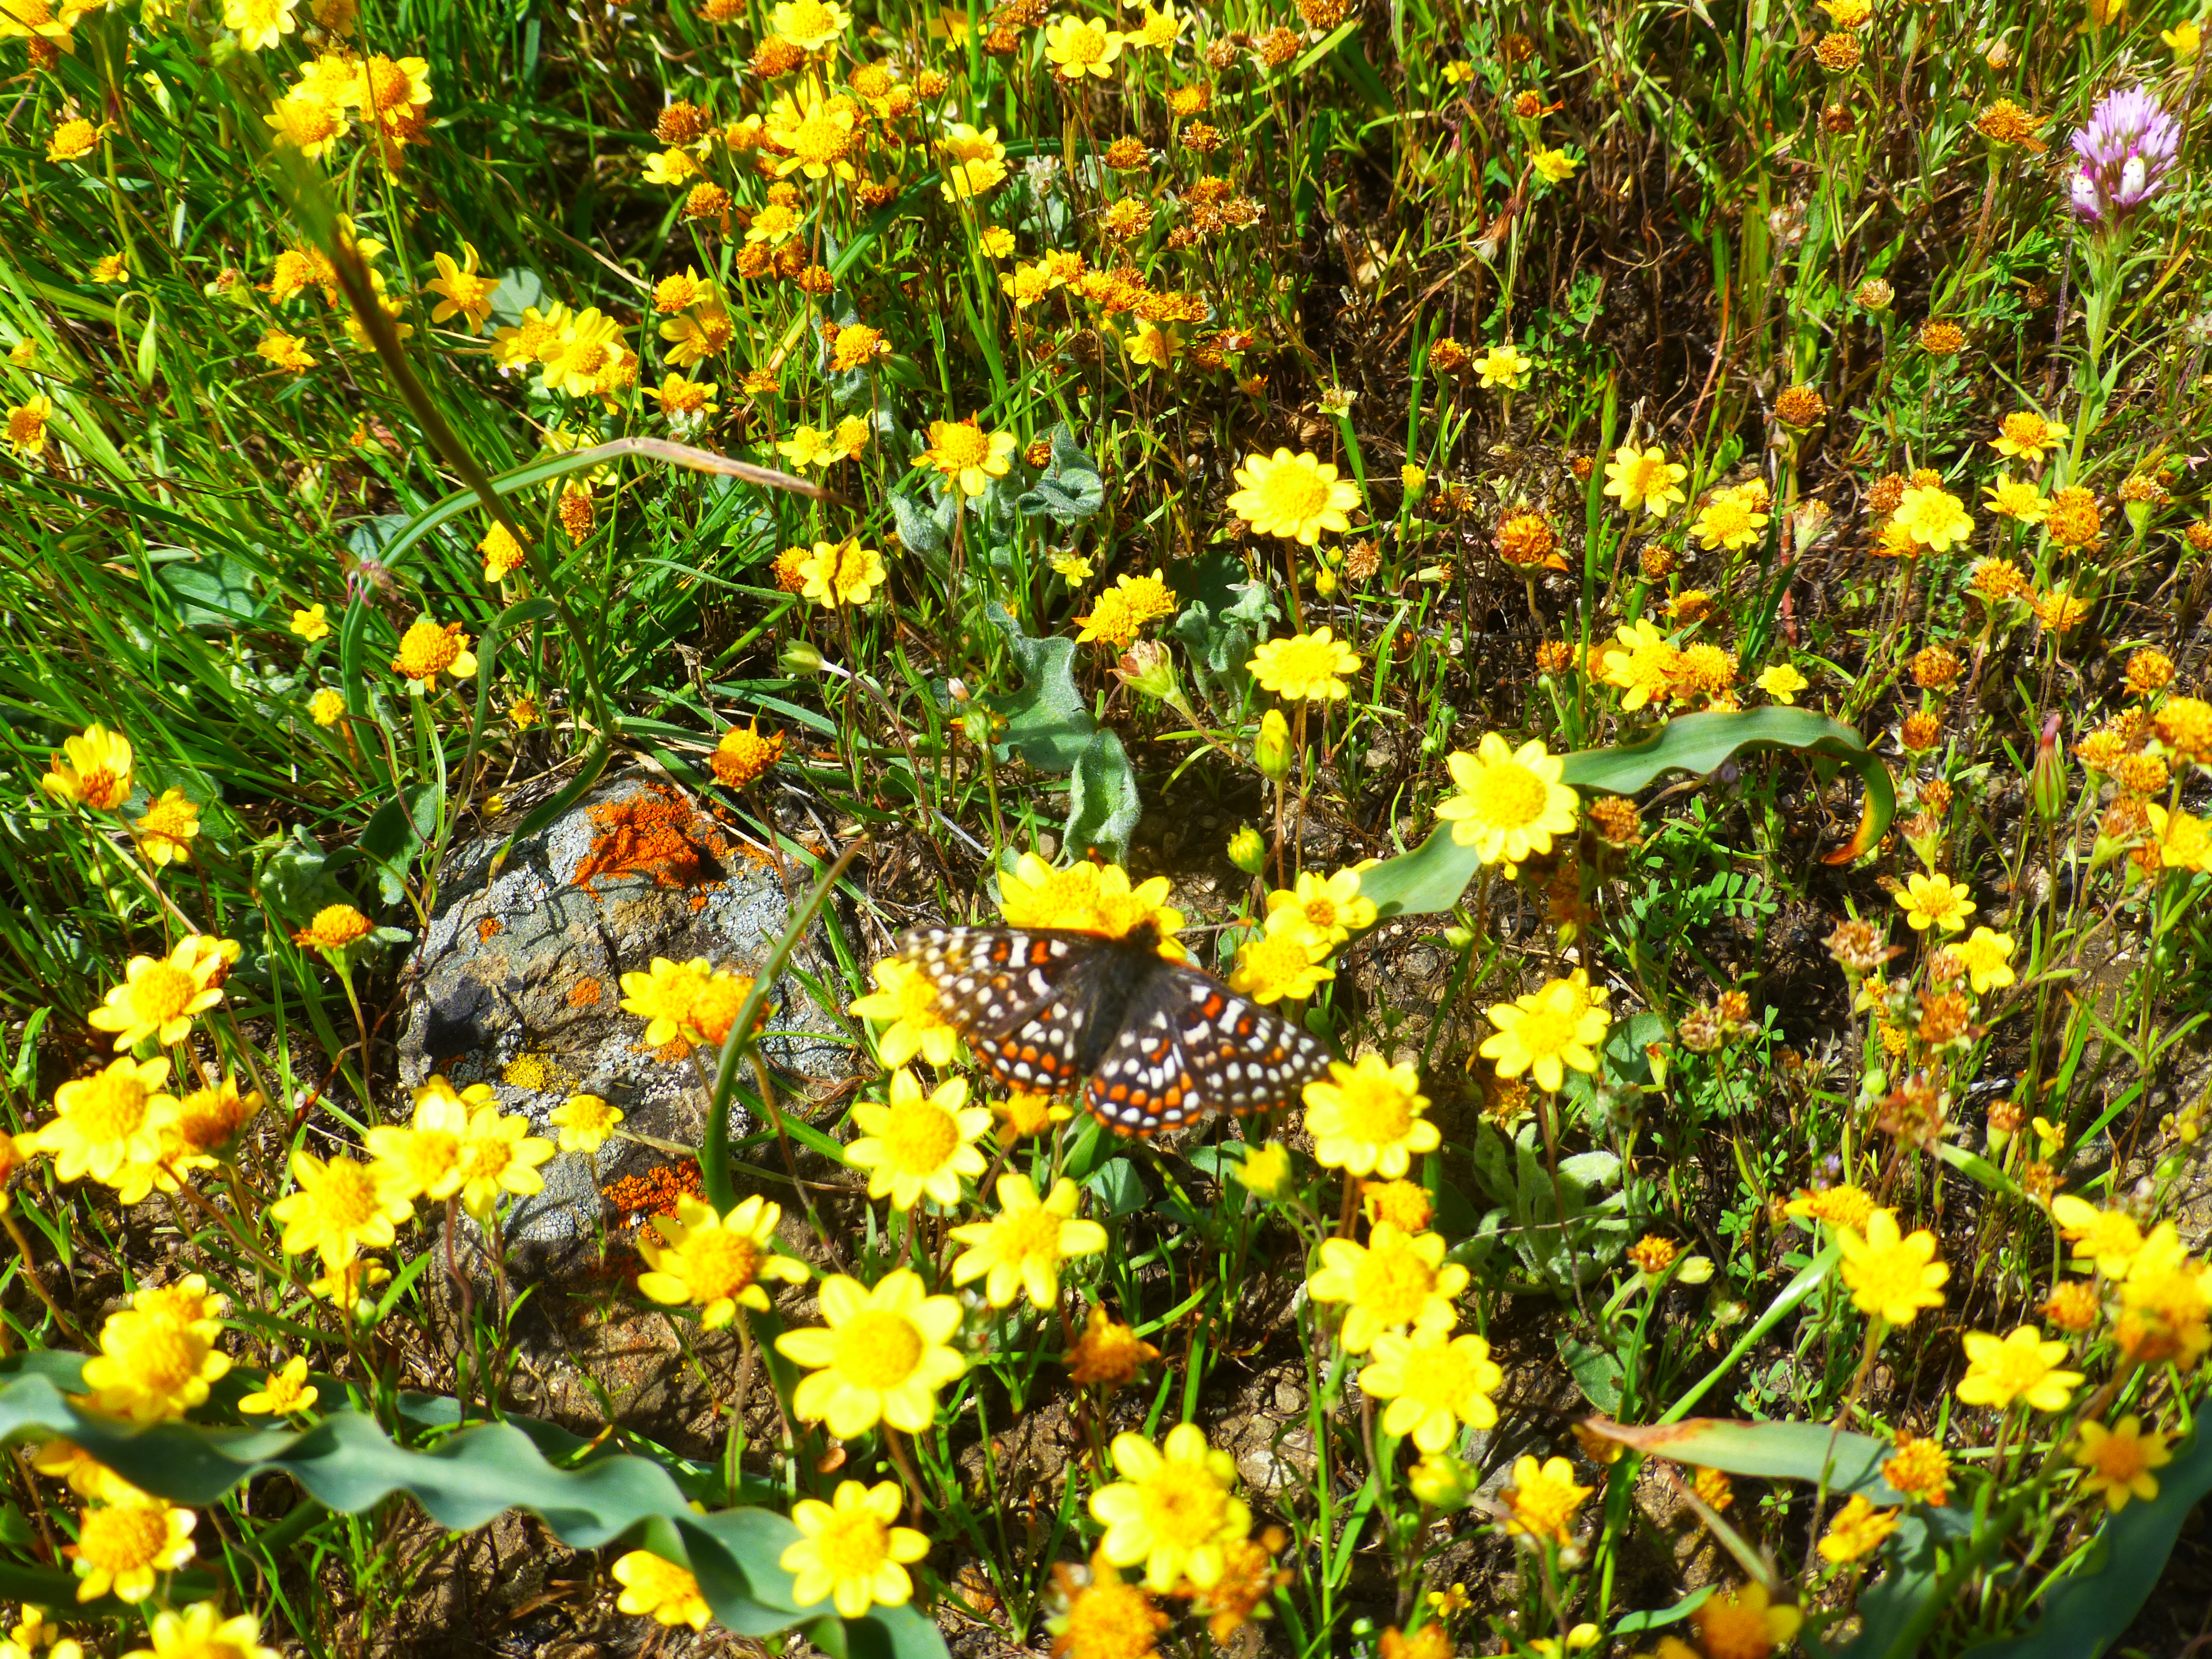        The photo is of an endangered Checkerspot Butterfly, which thrives only in open spaces. Photo by Dave Poeschel